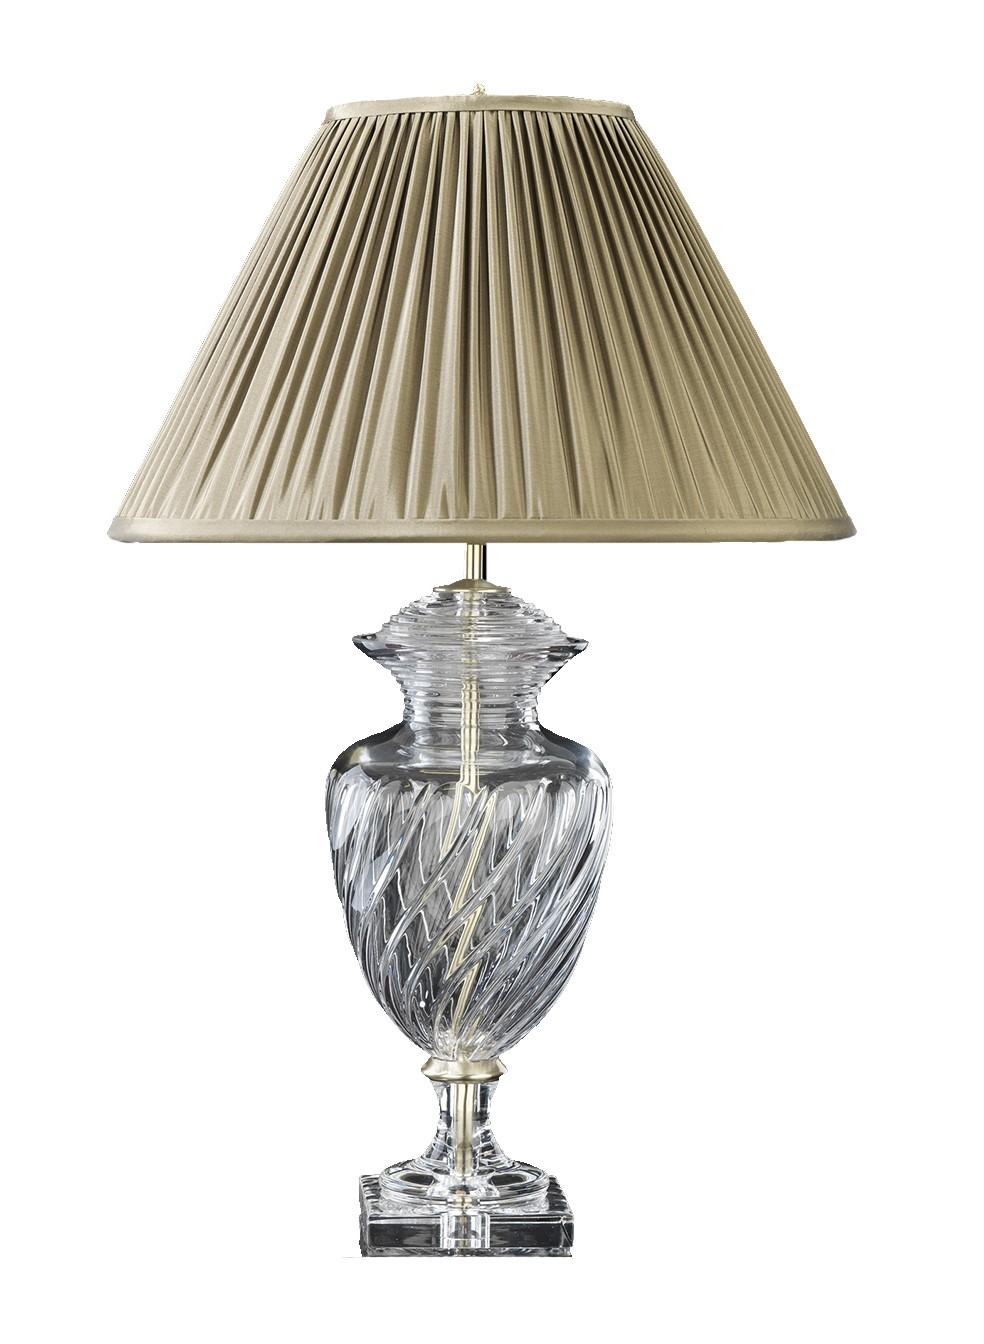 Evoking the glamour of 18th century French neoclassicism, this lavish table lamp is entirely made of handcut crystal. The sinuous silhouette, reminiscent of Classic Roman amphorae, is enhanced by delicate ridges on the glass, gracefully swirling